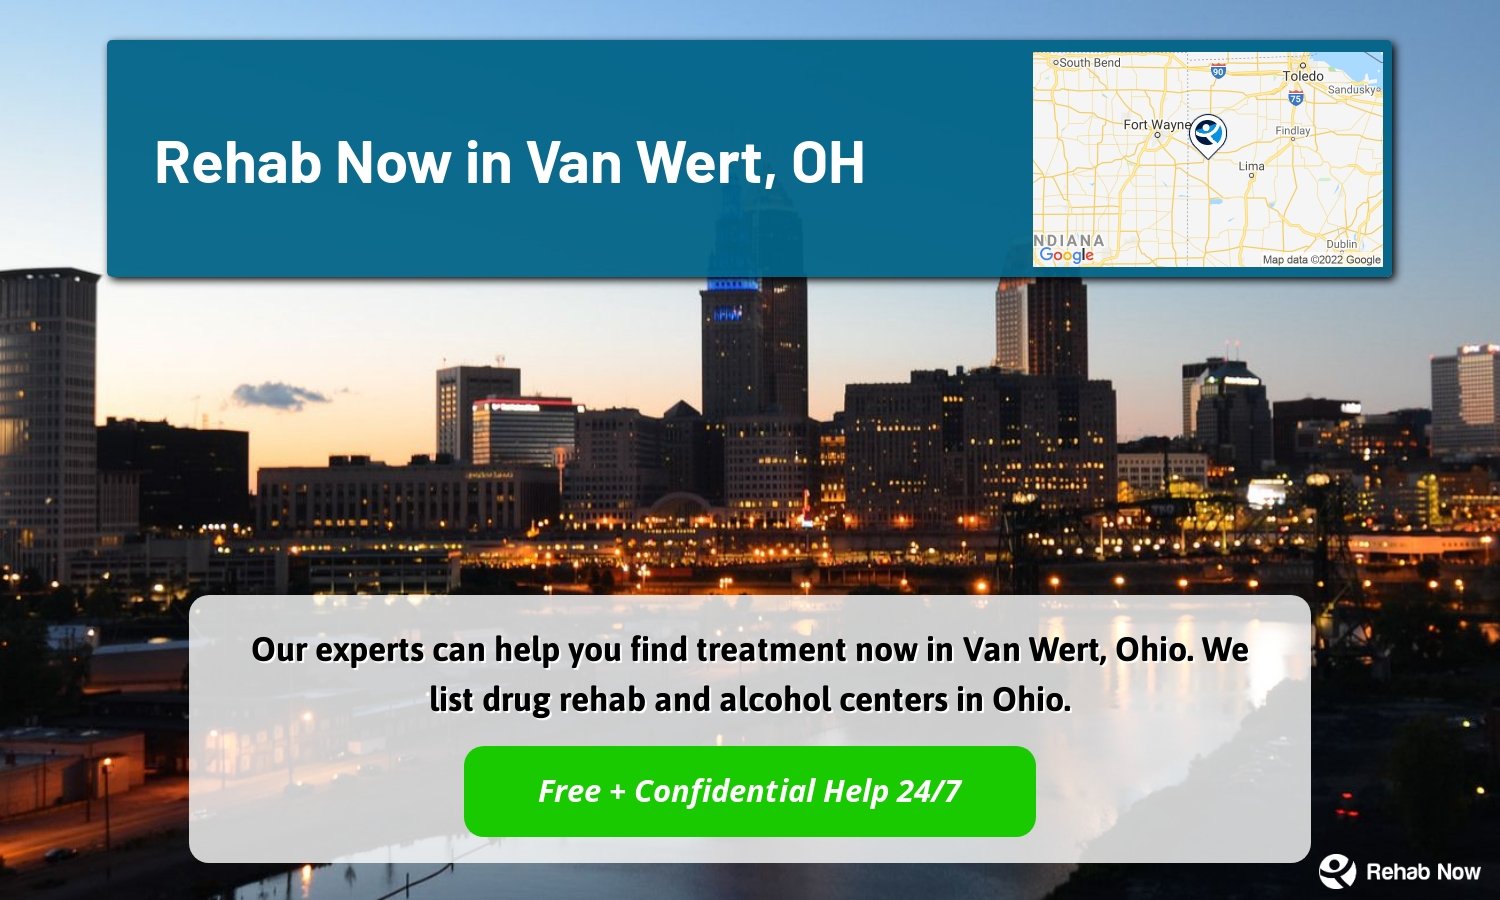 Our experts can help you find treatment now in Van Wert, Ohio. We list drug rehab and alcohol centers in Ohio.